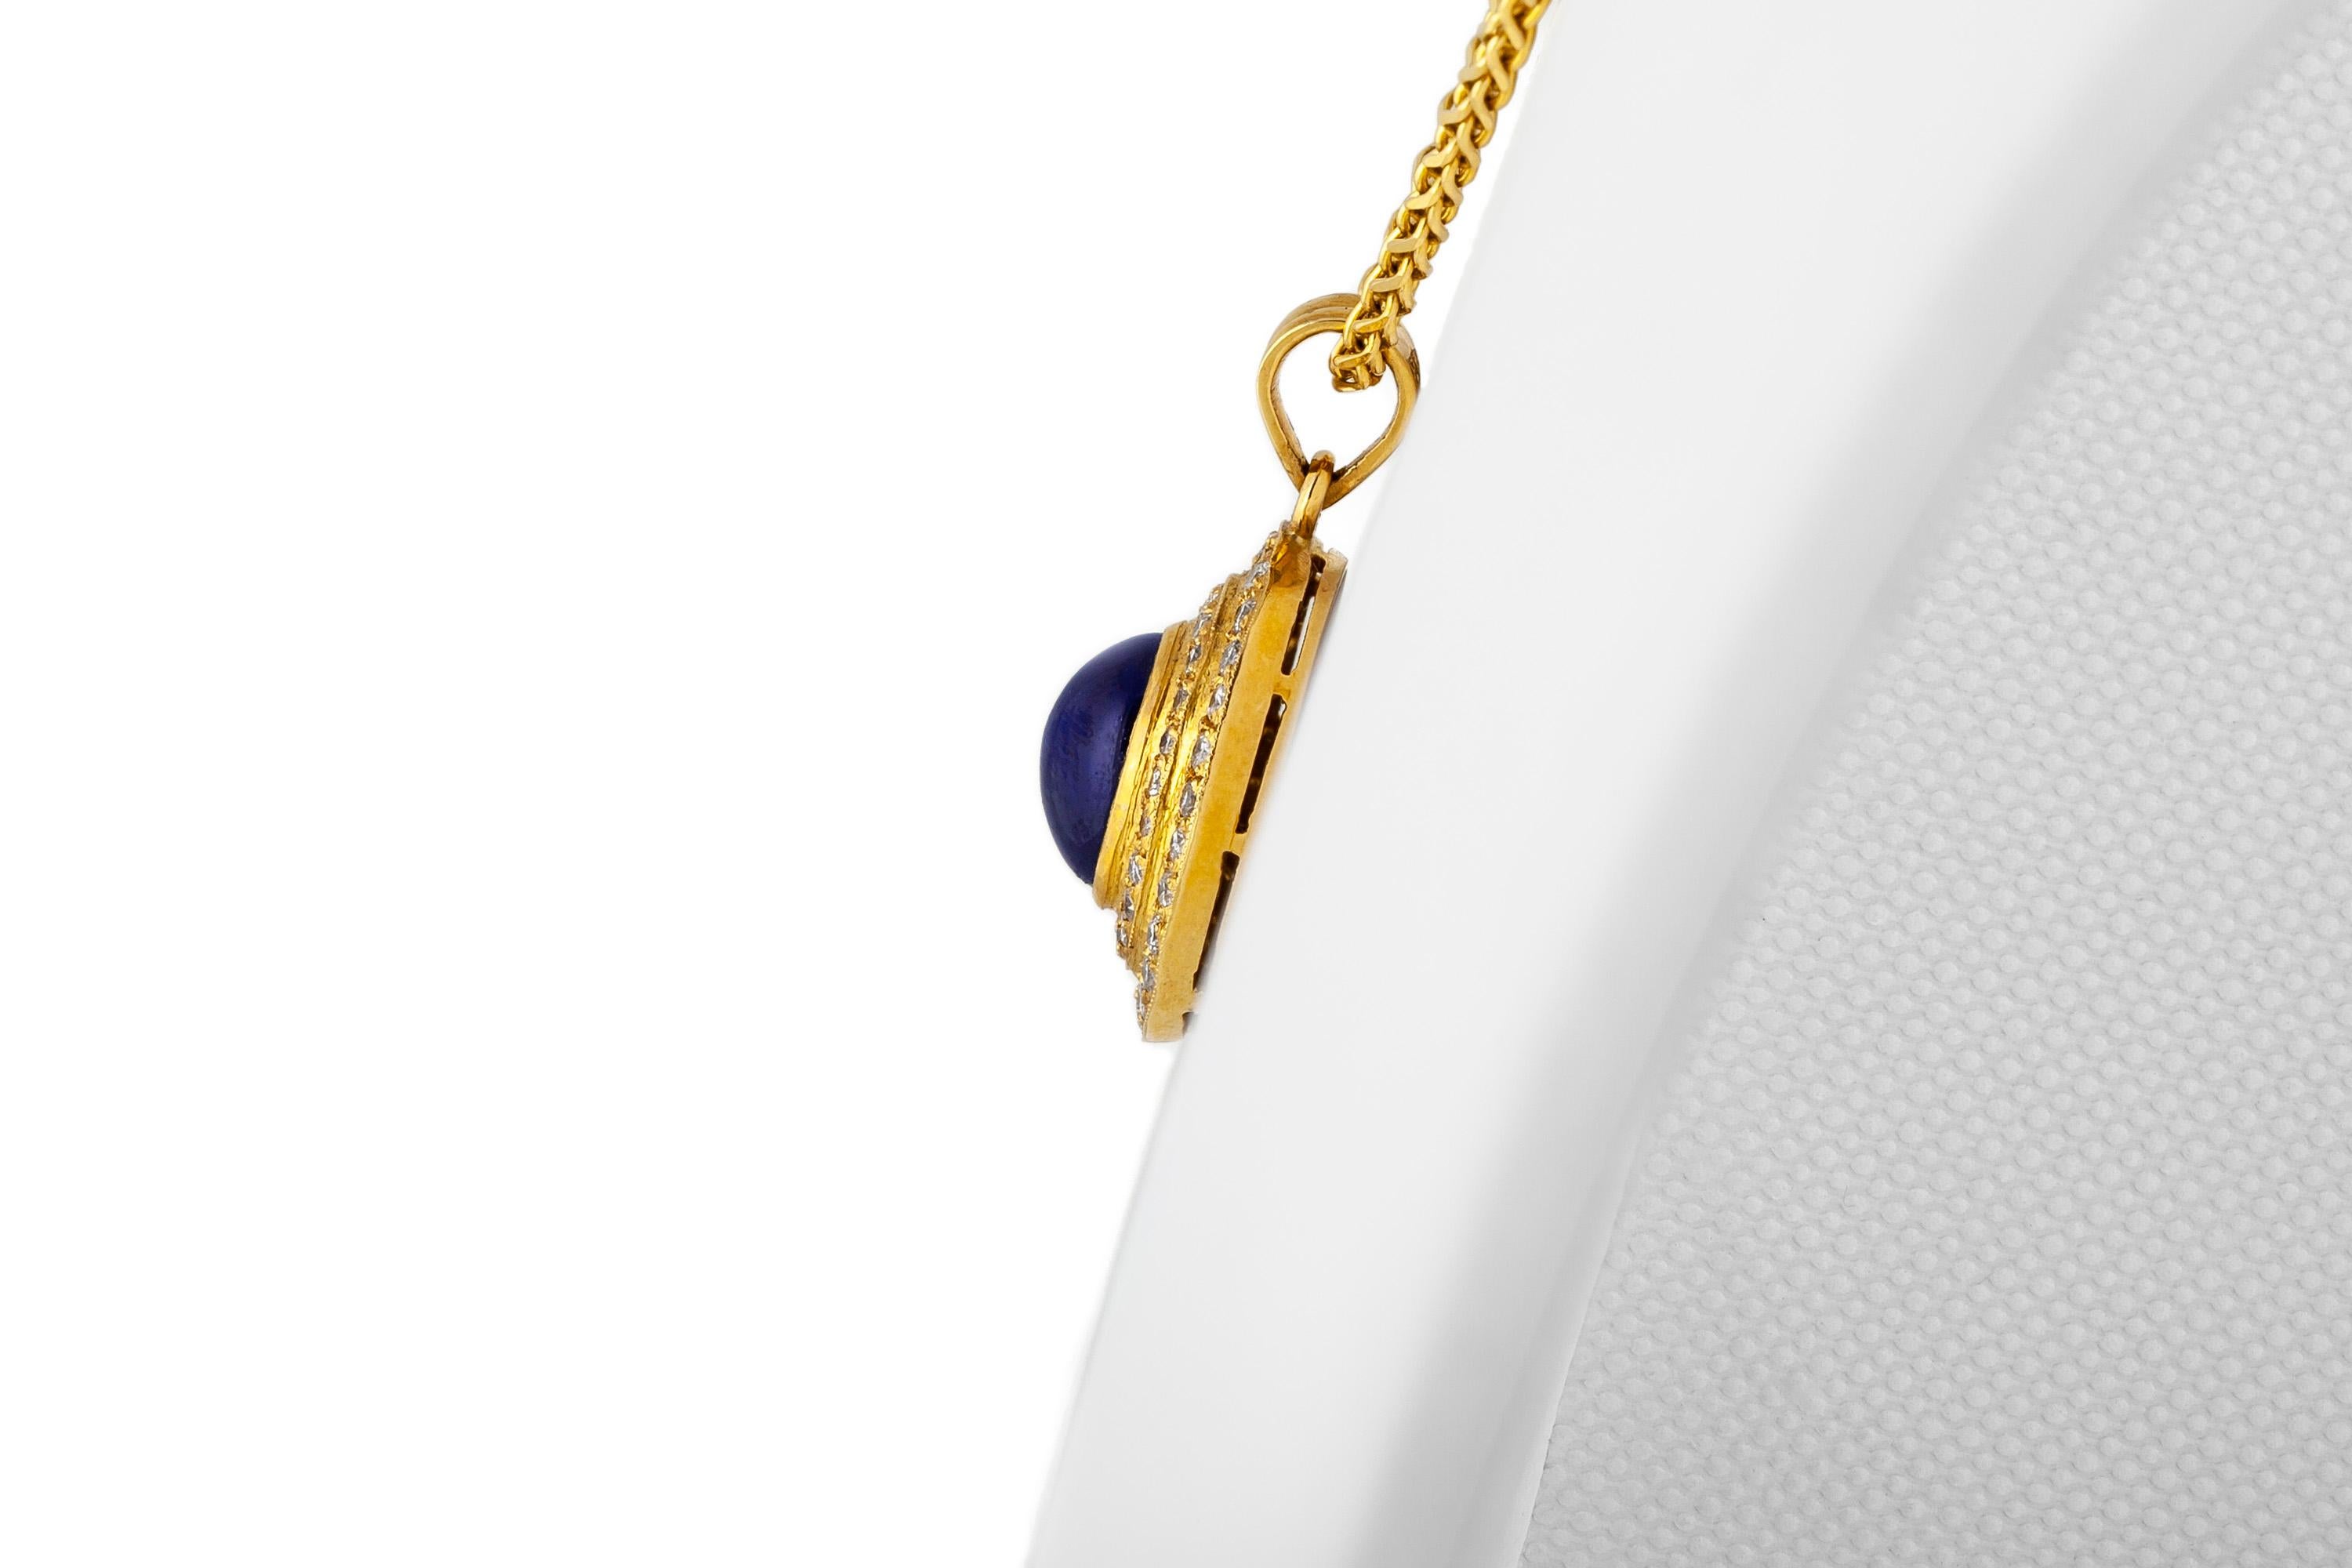 The pendant finely crafted in 18k yellow gold with center caboshon sapphire weighing approximately total of 3.00 carat and diamonds around weighing approximately total of 1.30 carat.
Circa 1980.